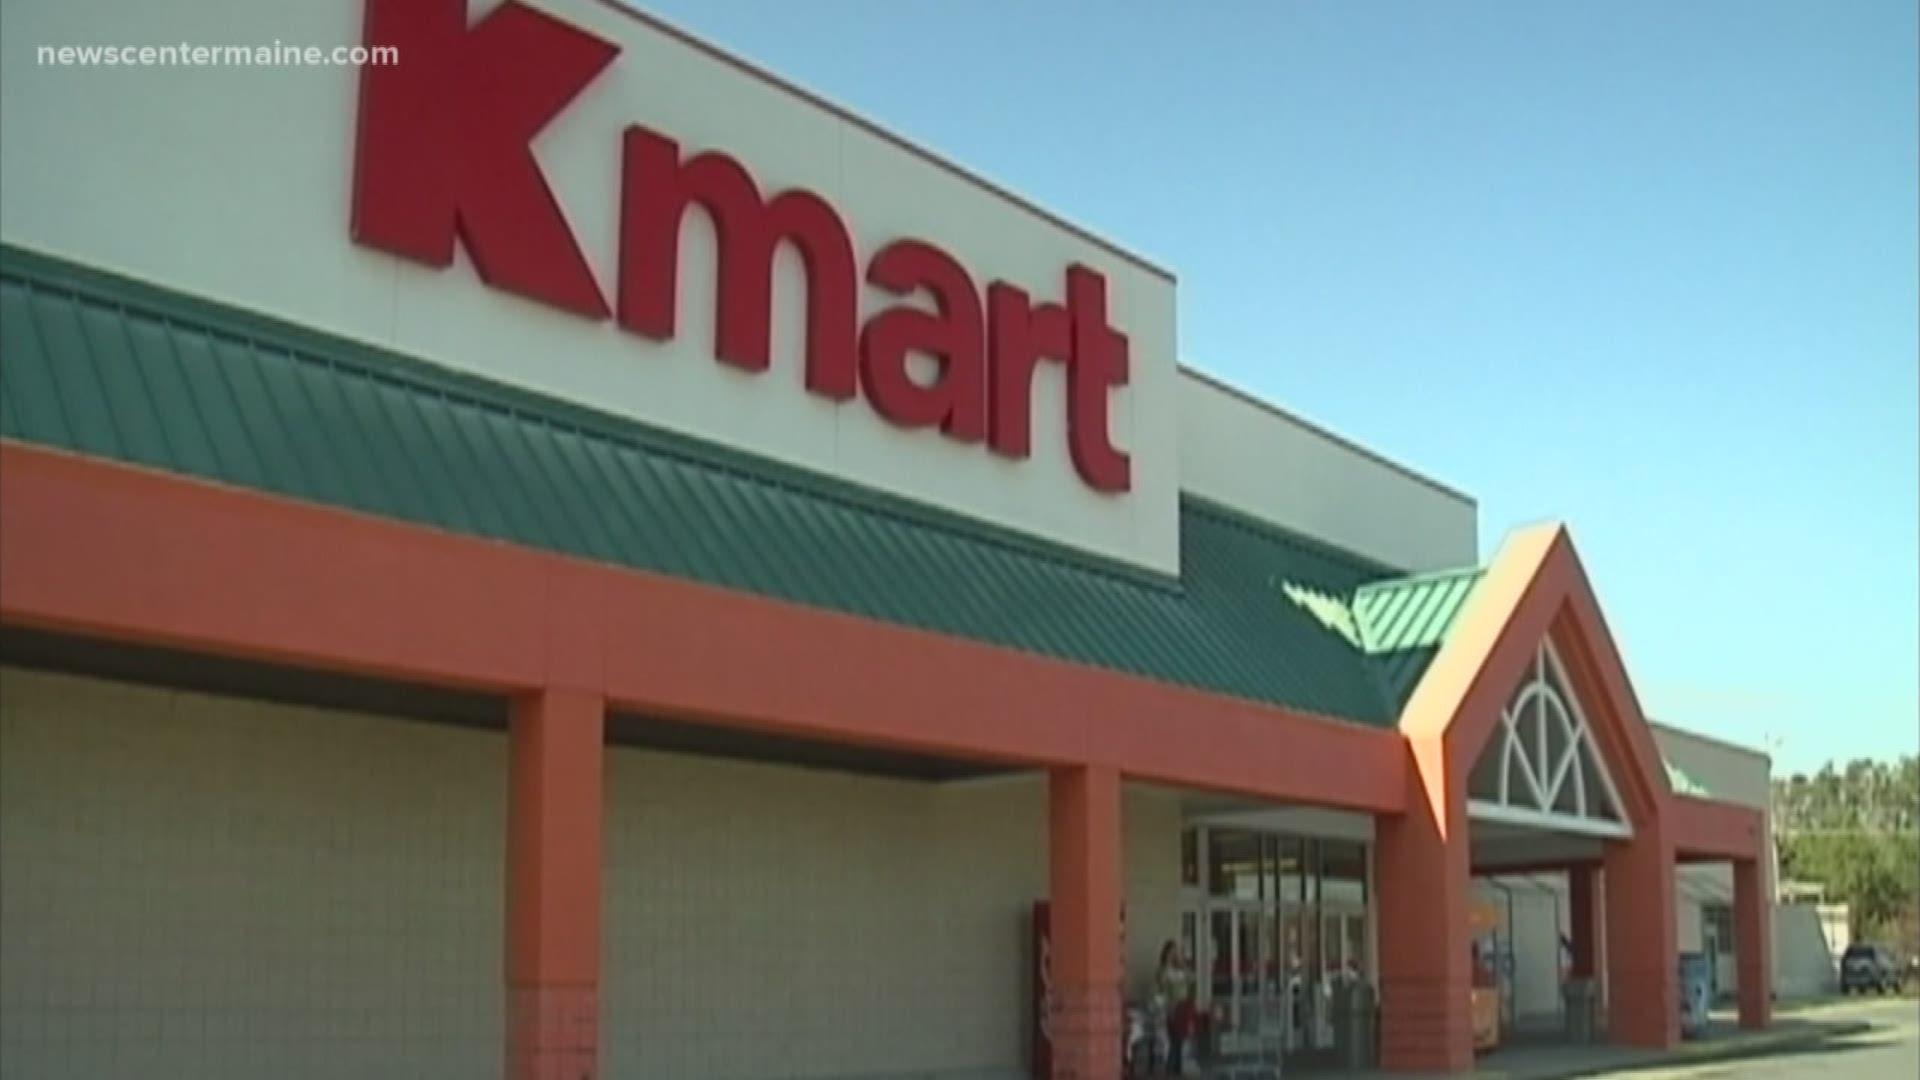 The last two K-Mart stores in Maine are closing for good. The Auburn and Augusta stores will begin liquidation sales this month and will close by mid-December.